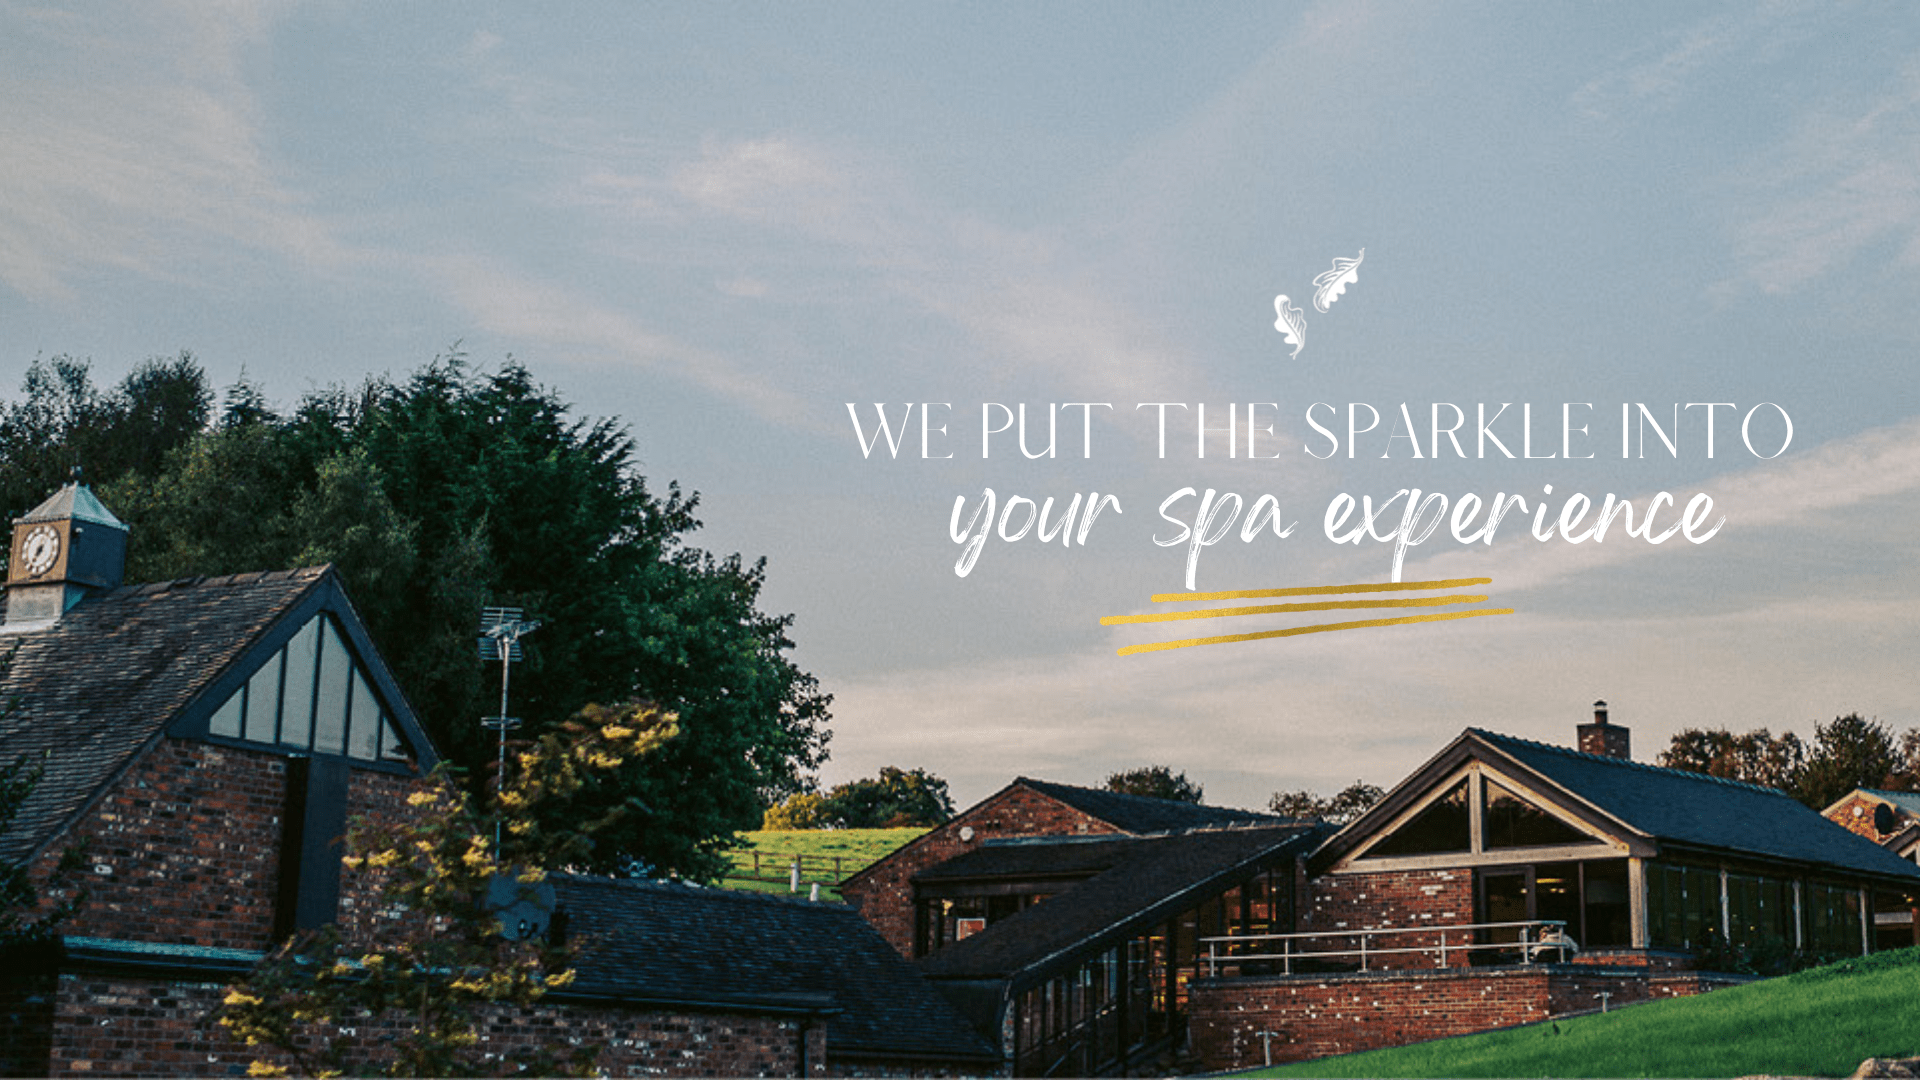 Added Sparkle To your Stay